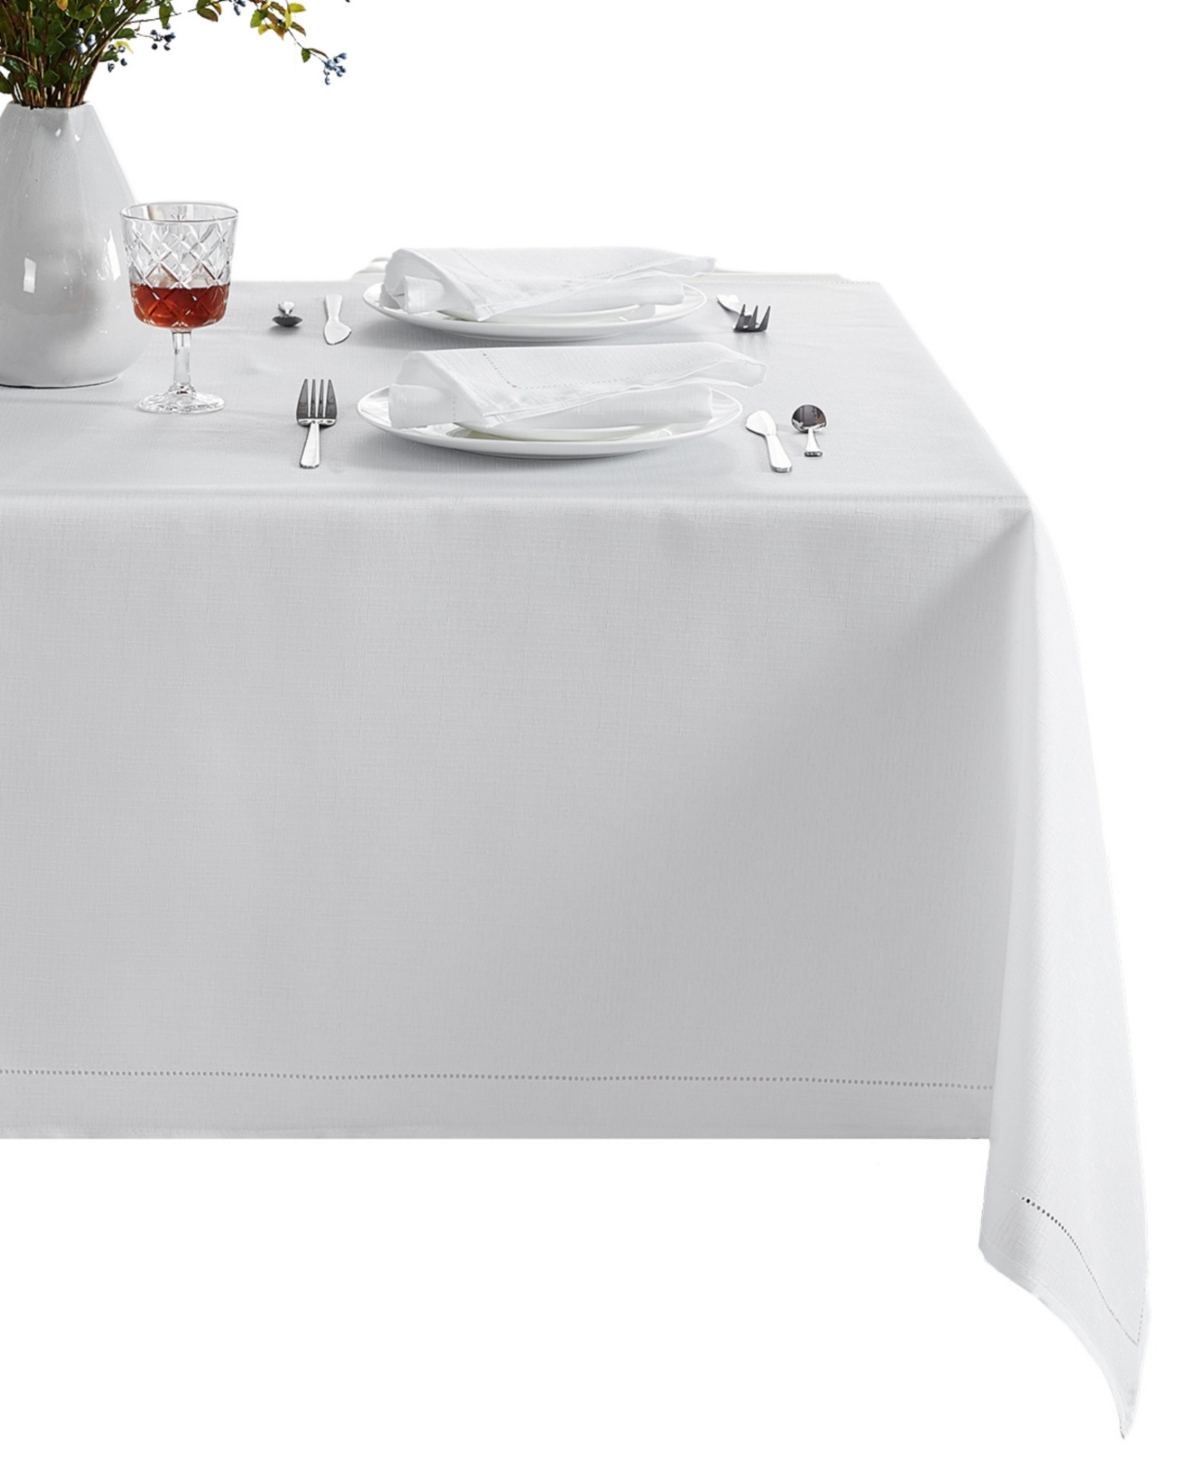 Elrene Alison Eyelet Punched Border Fabric Tablecloth, 60" X 102" In White